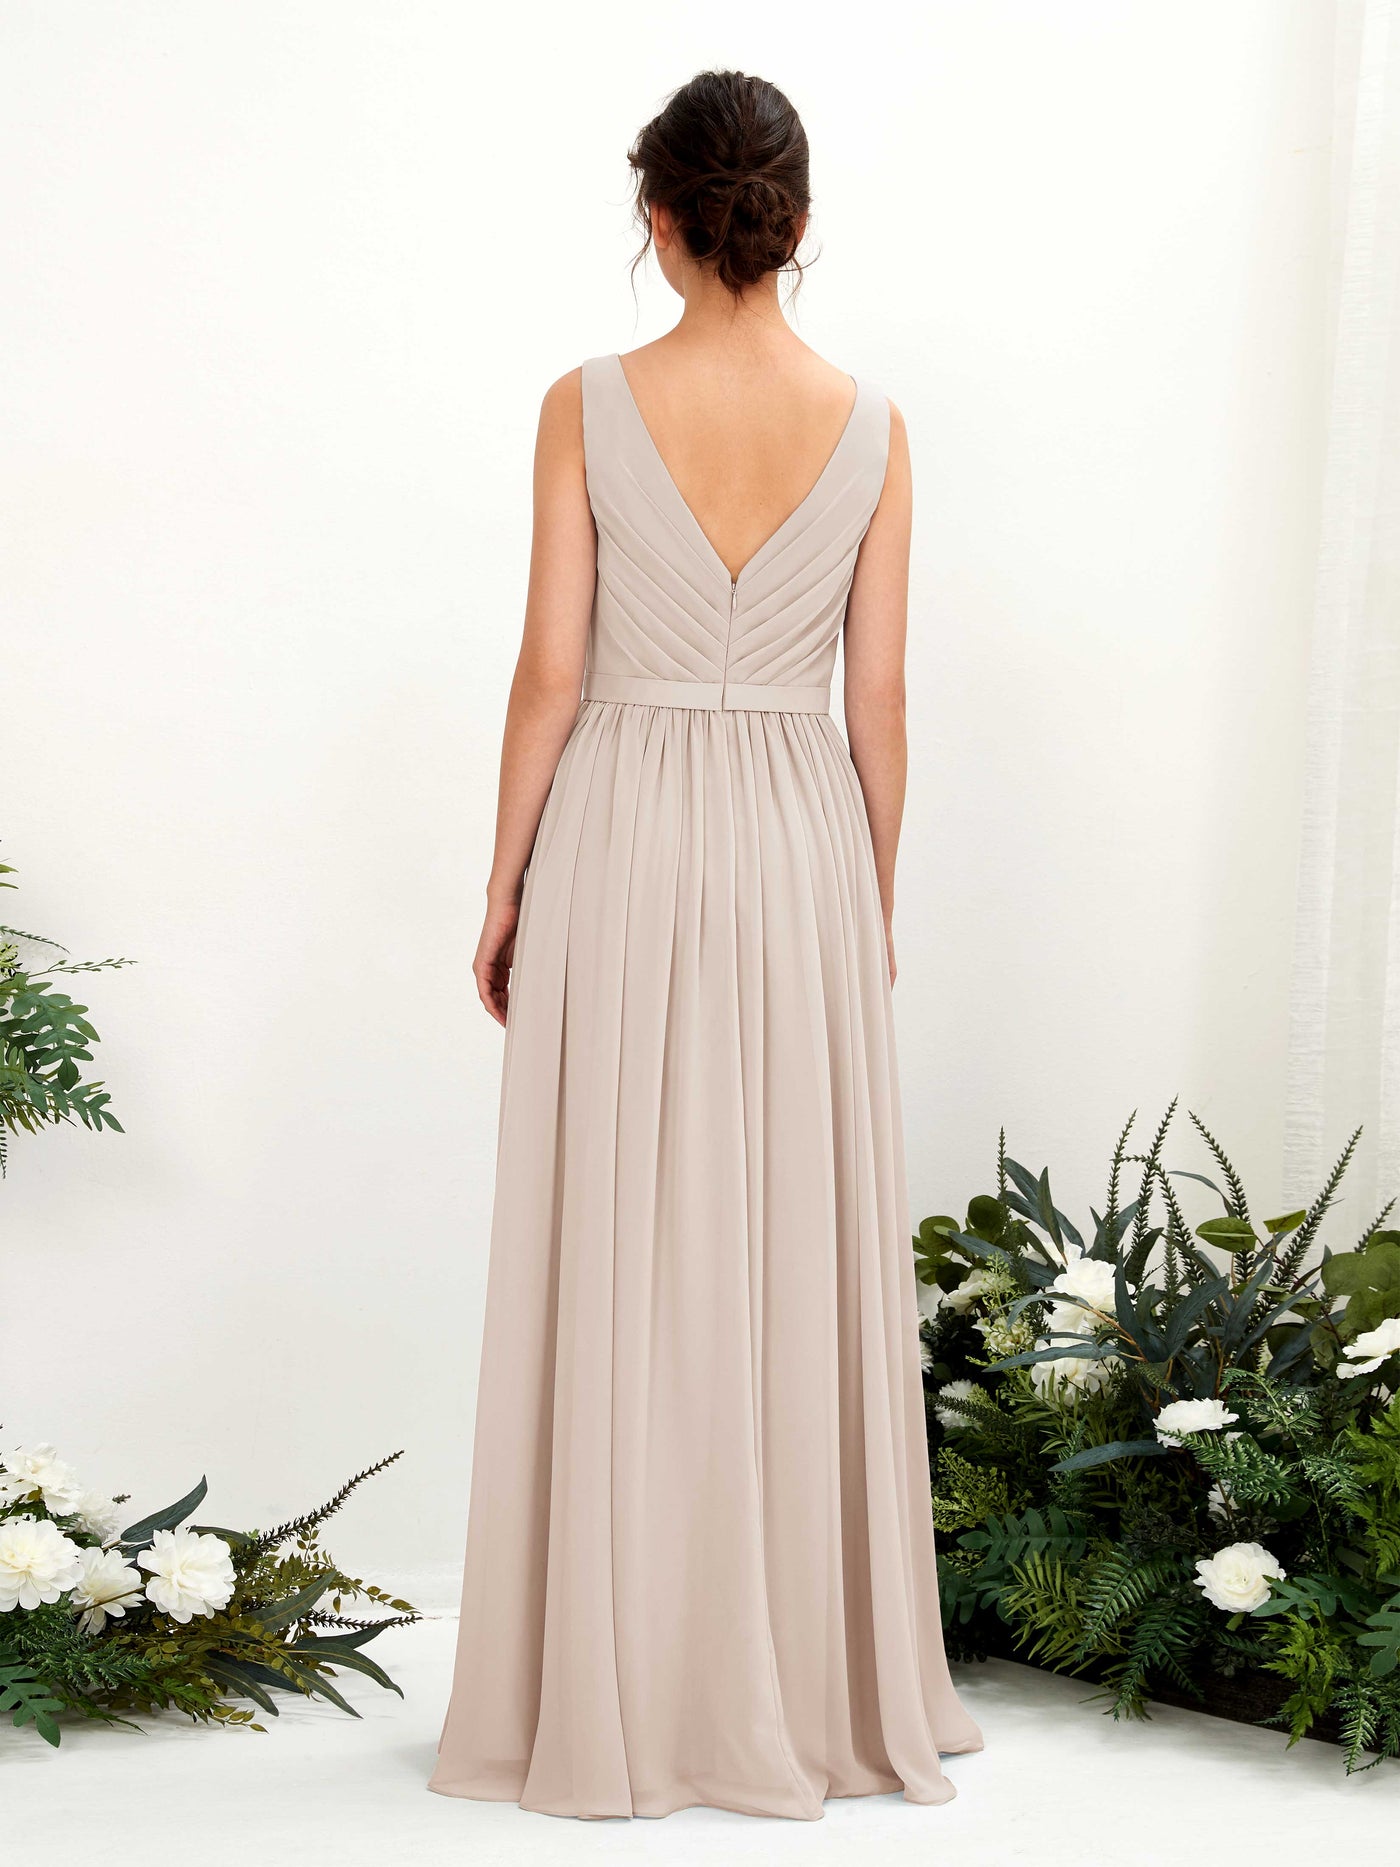 Champagne Bridesmaid Dresses Bridesmaid Dress A-line Chiffon V-neck Full Length Sleeveless Wedding Party Dress (81223616)#color_champagne